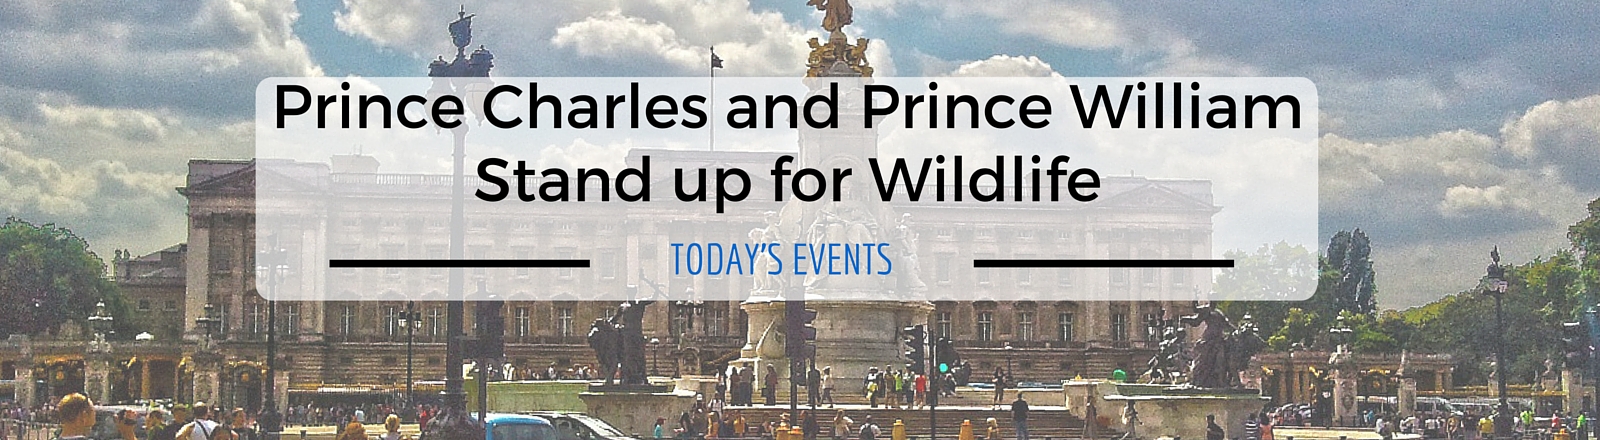 Prince Charles and Prince William Stand up for Wildlife, National Parks Guy